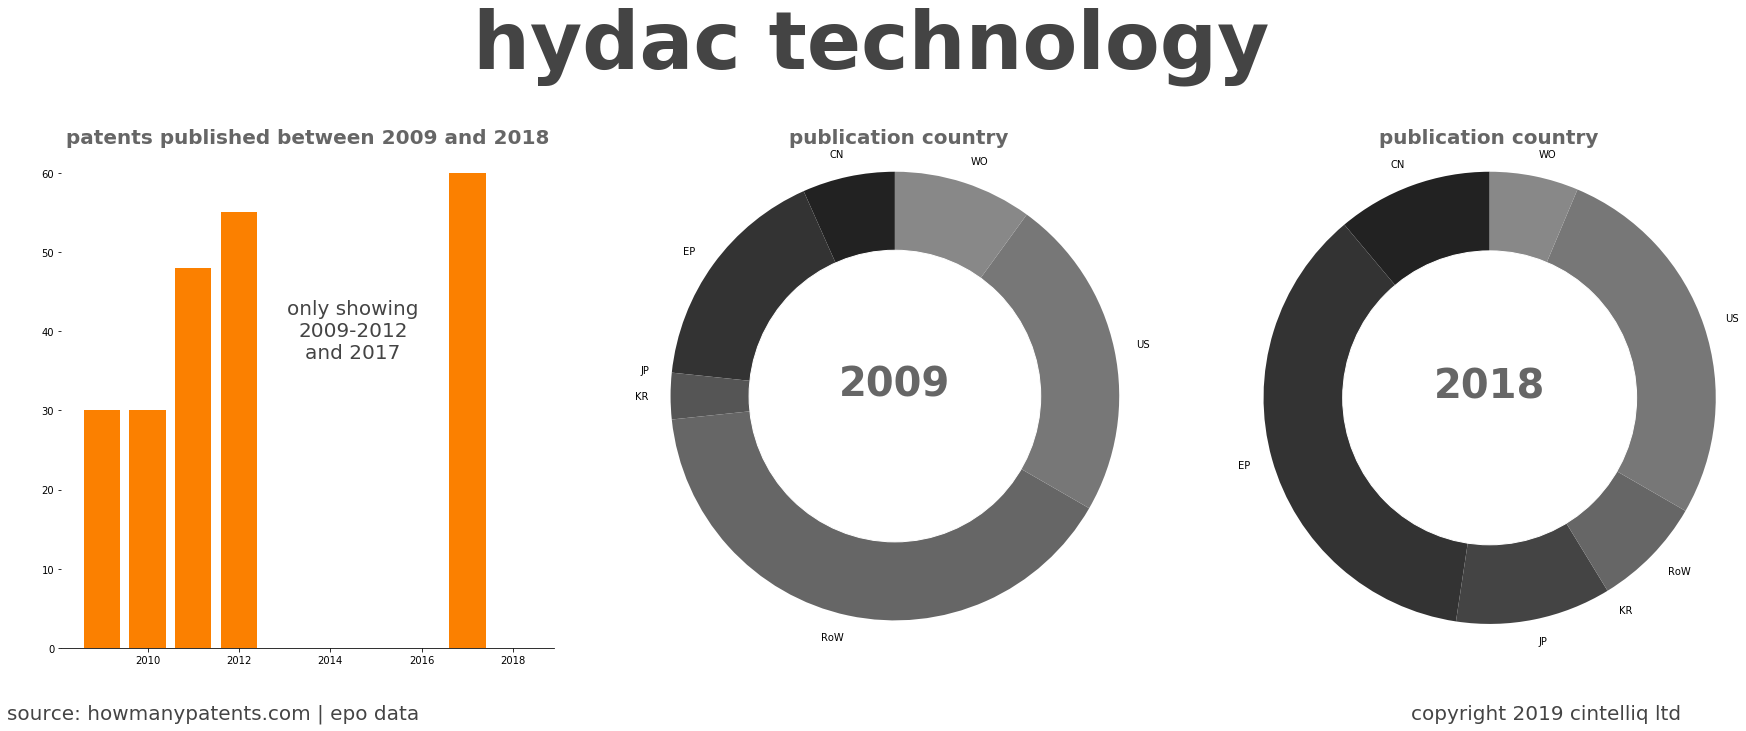 summary of patents for Hydac Technology